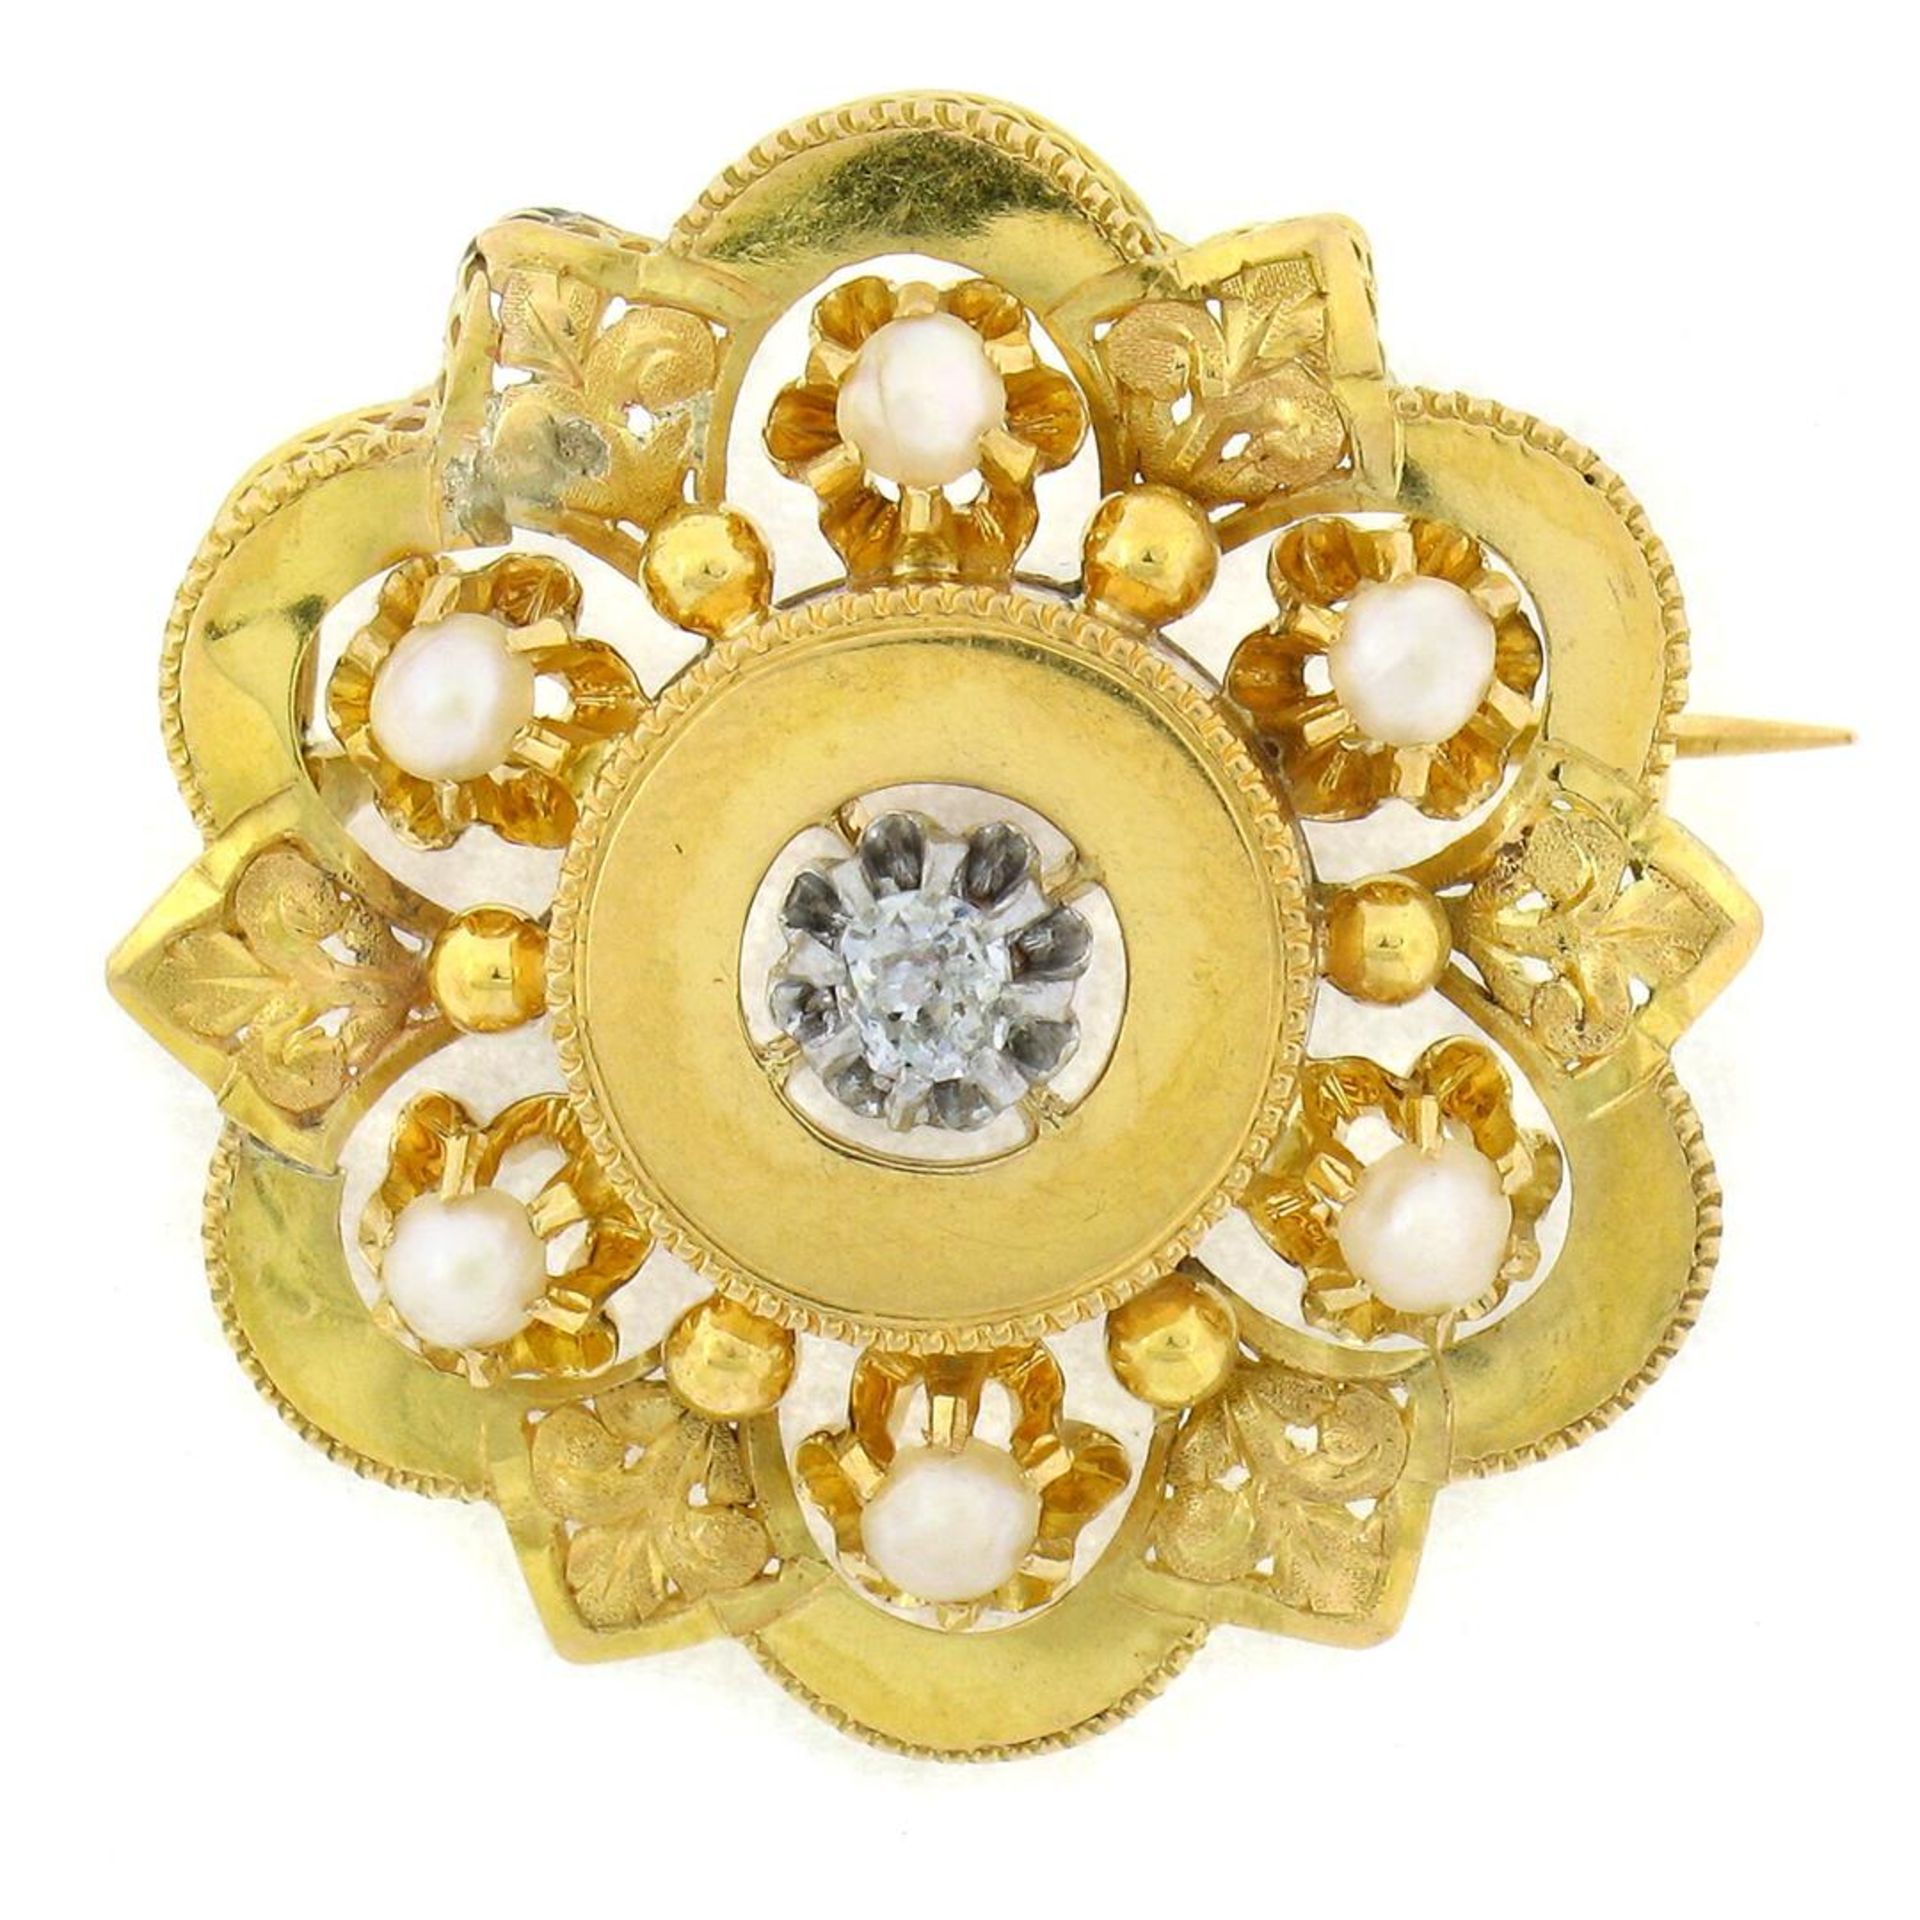 Antique Victorian 18K Yellow Gold Diamond Pearl Detailed Open Flower Brooch Pin - Image 2 of 7